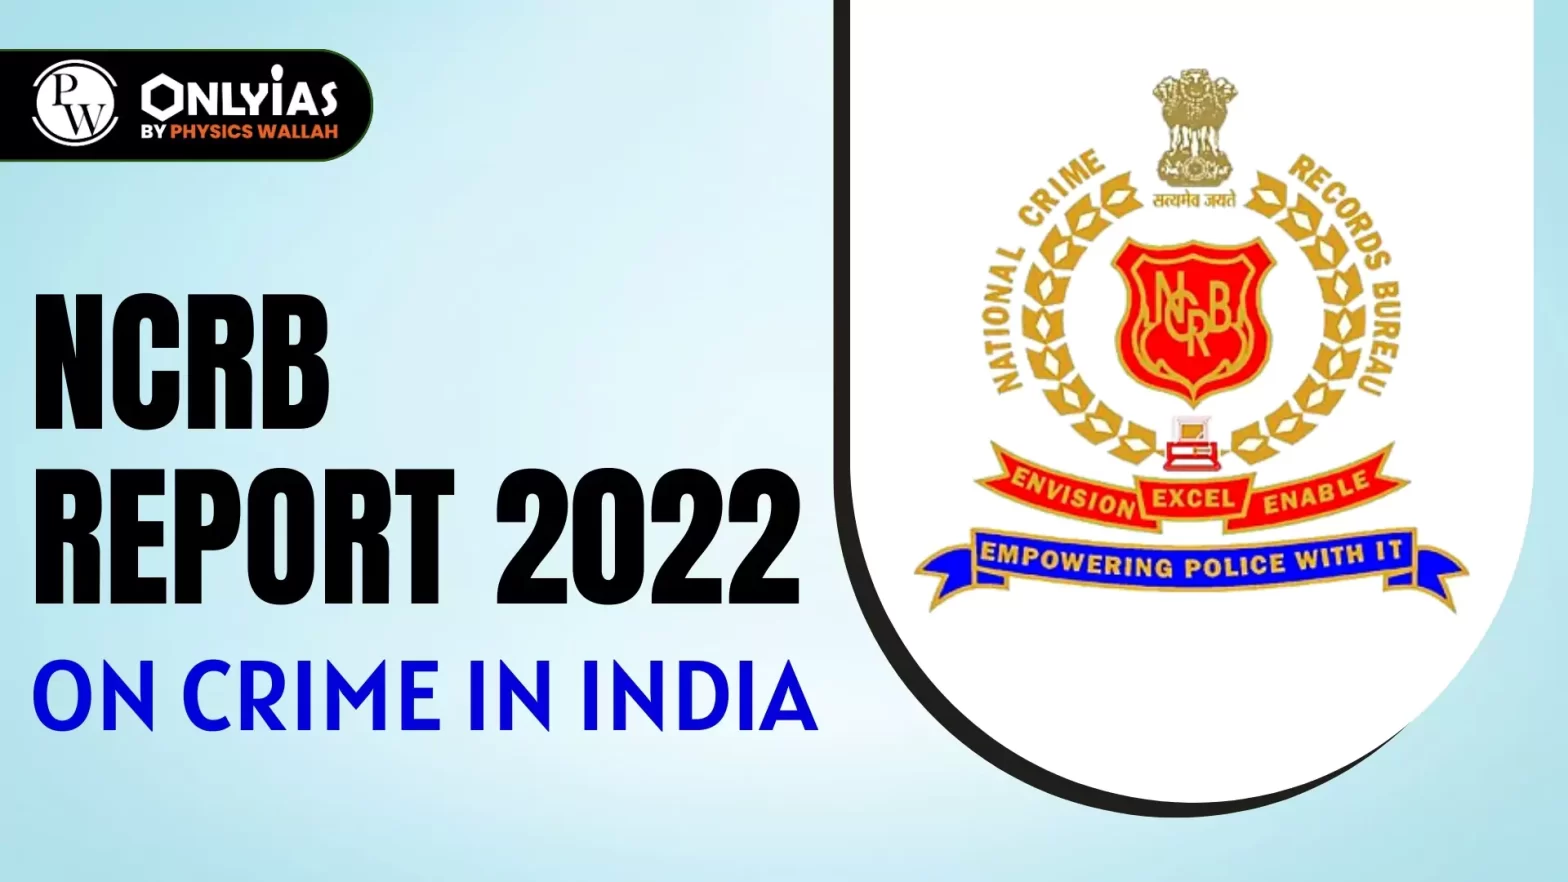 NCRB Report 2022 On Crime in India